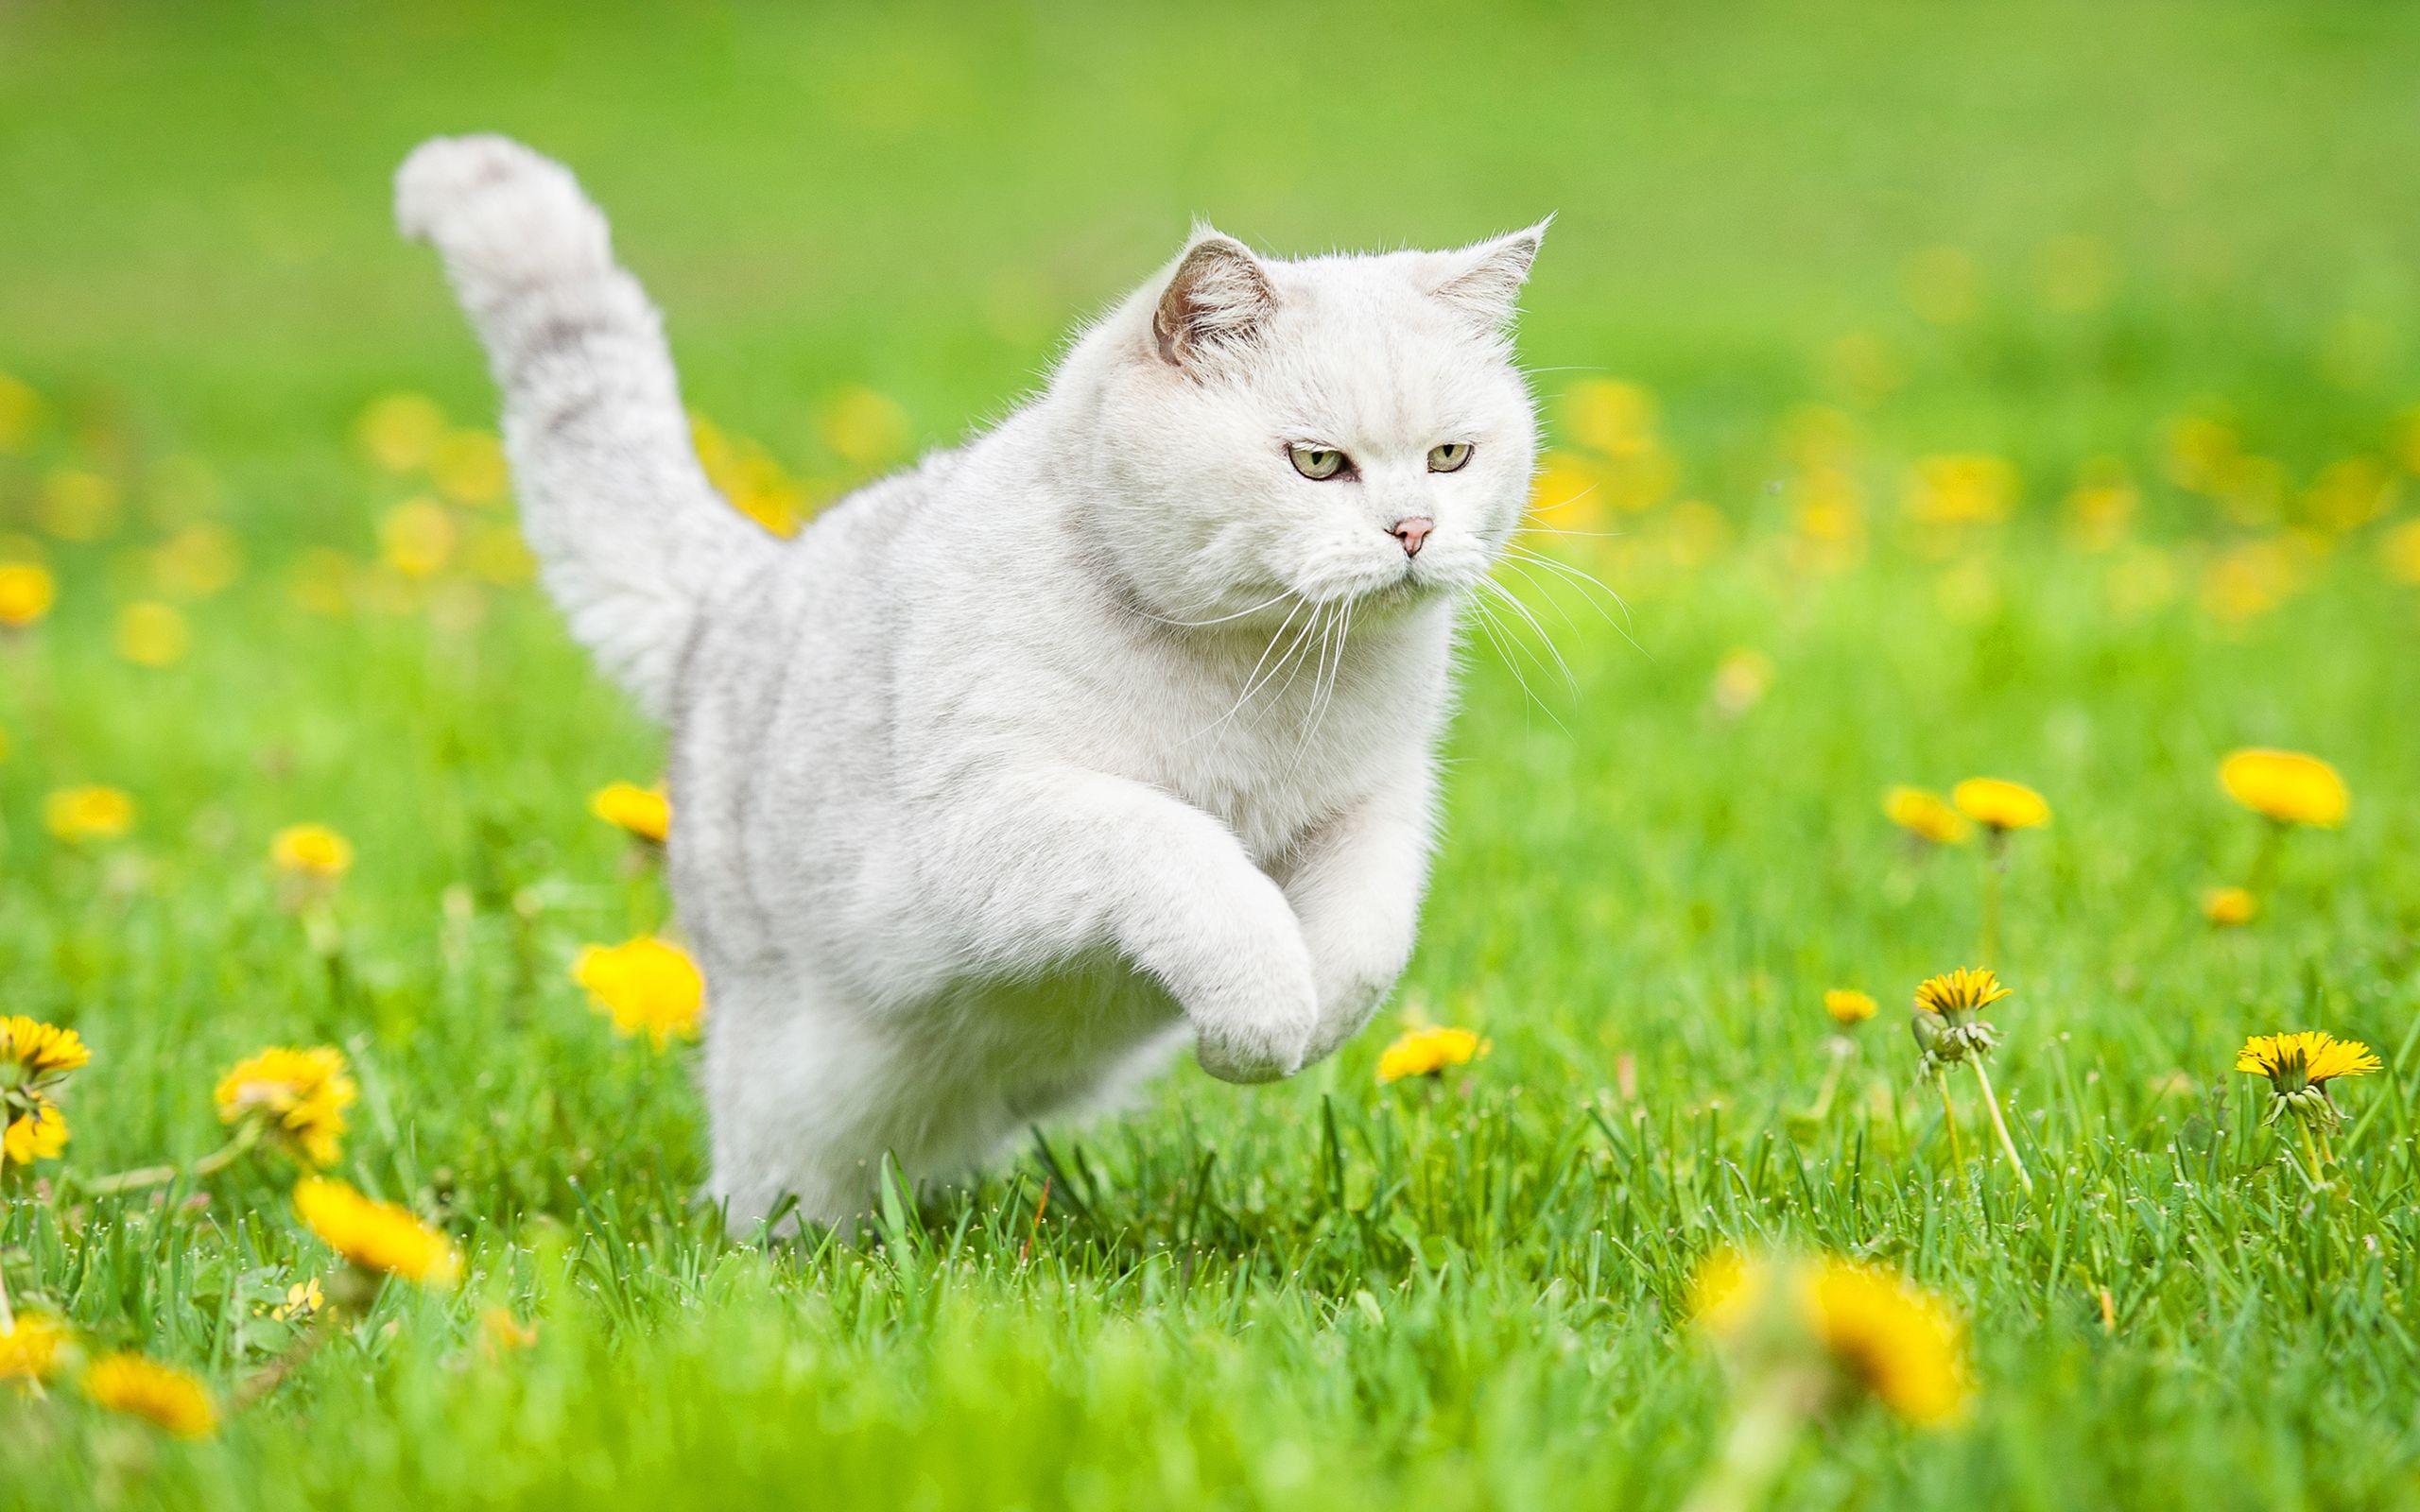 Download wallpaper British Shorthair, domestic cat, running cat, pets, cats, lawn, gray cat, cute animals, summer, British Shorthair Cat for desktop with resolution 2560x1600. High Quality HD picture wallpaper